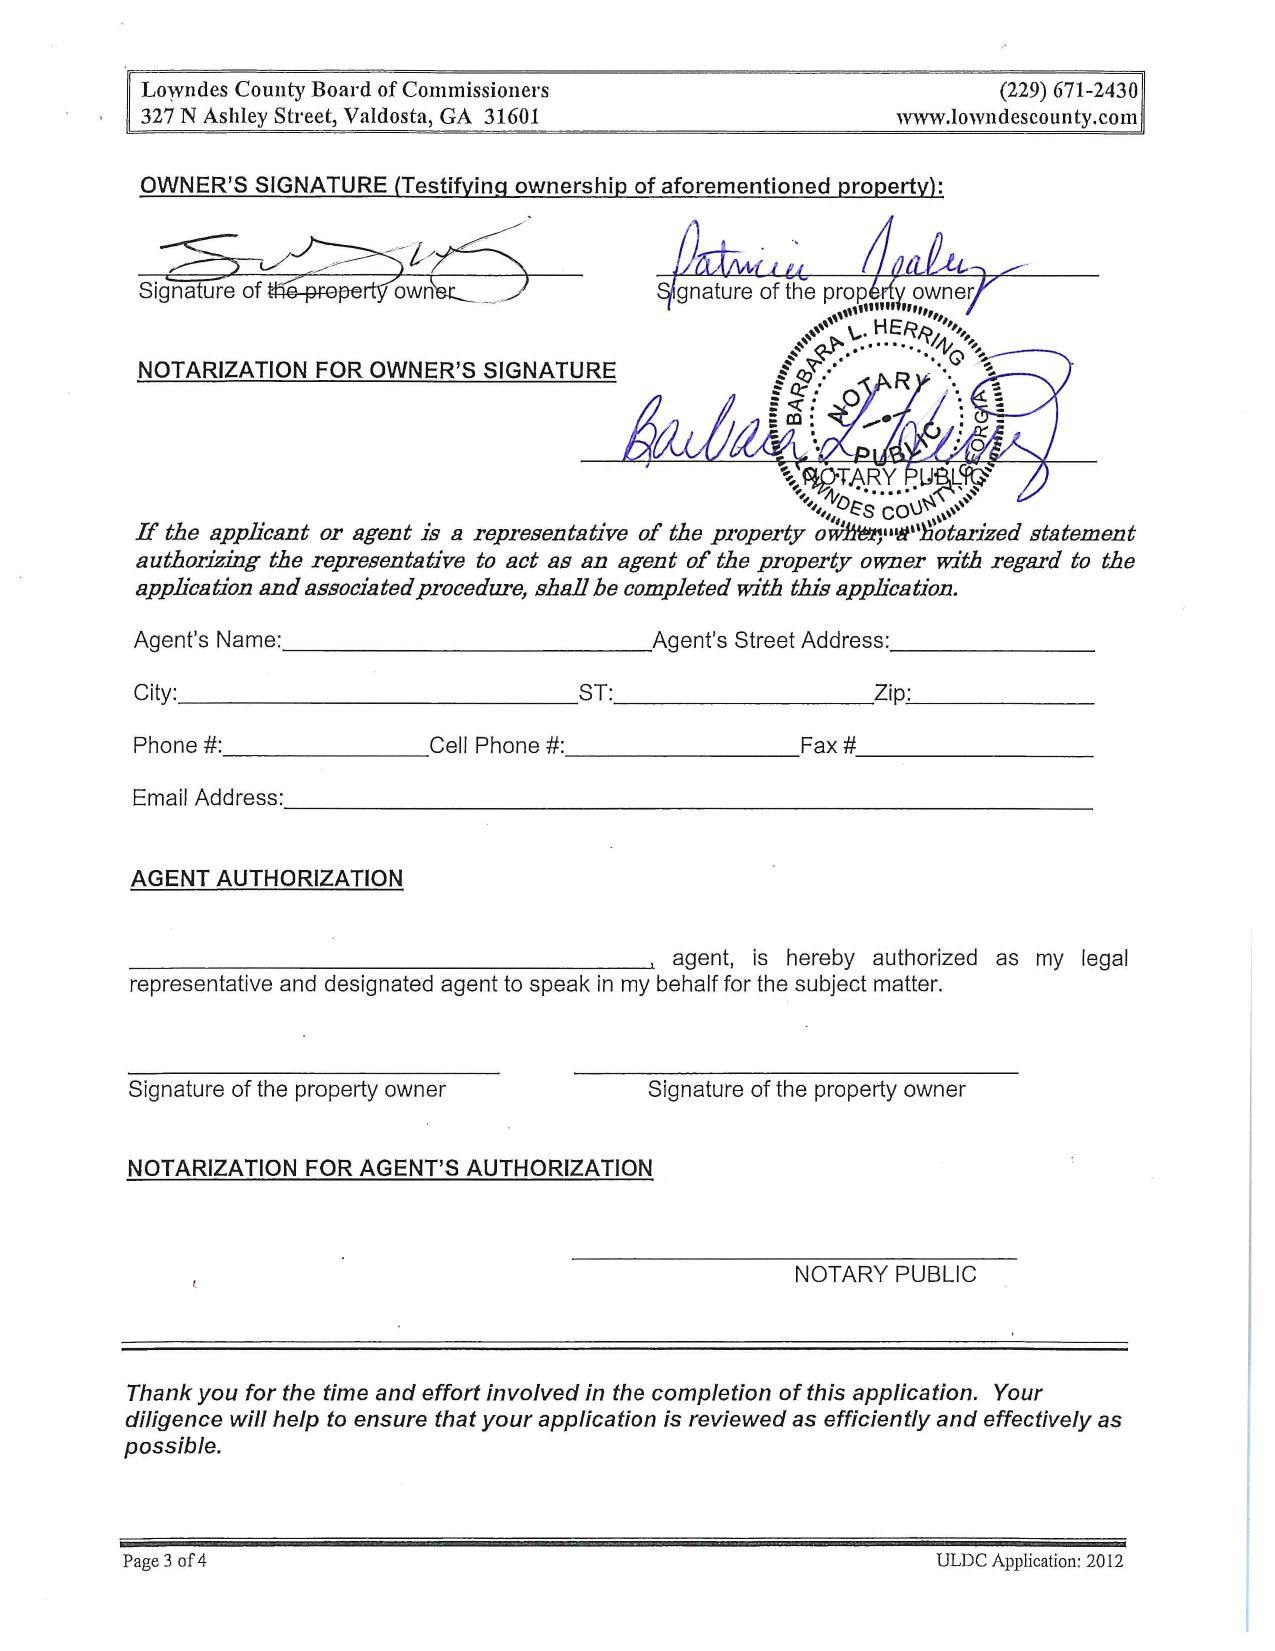 Signature of the property owner